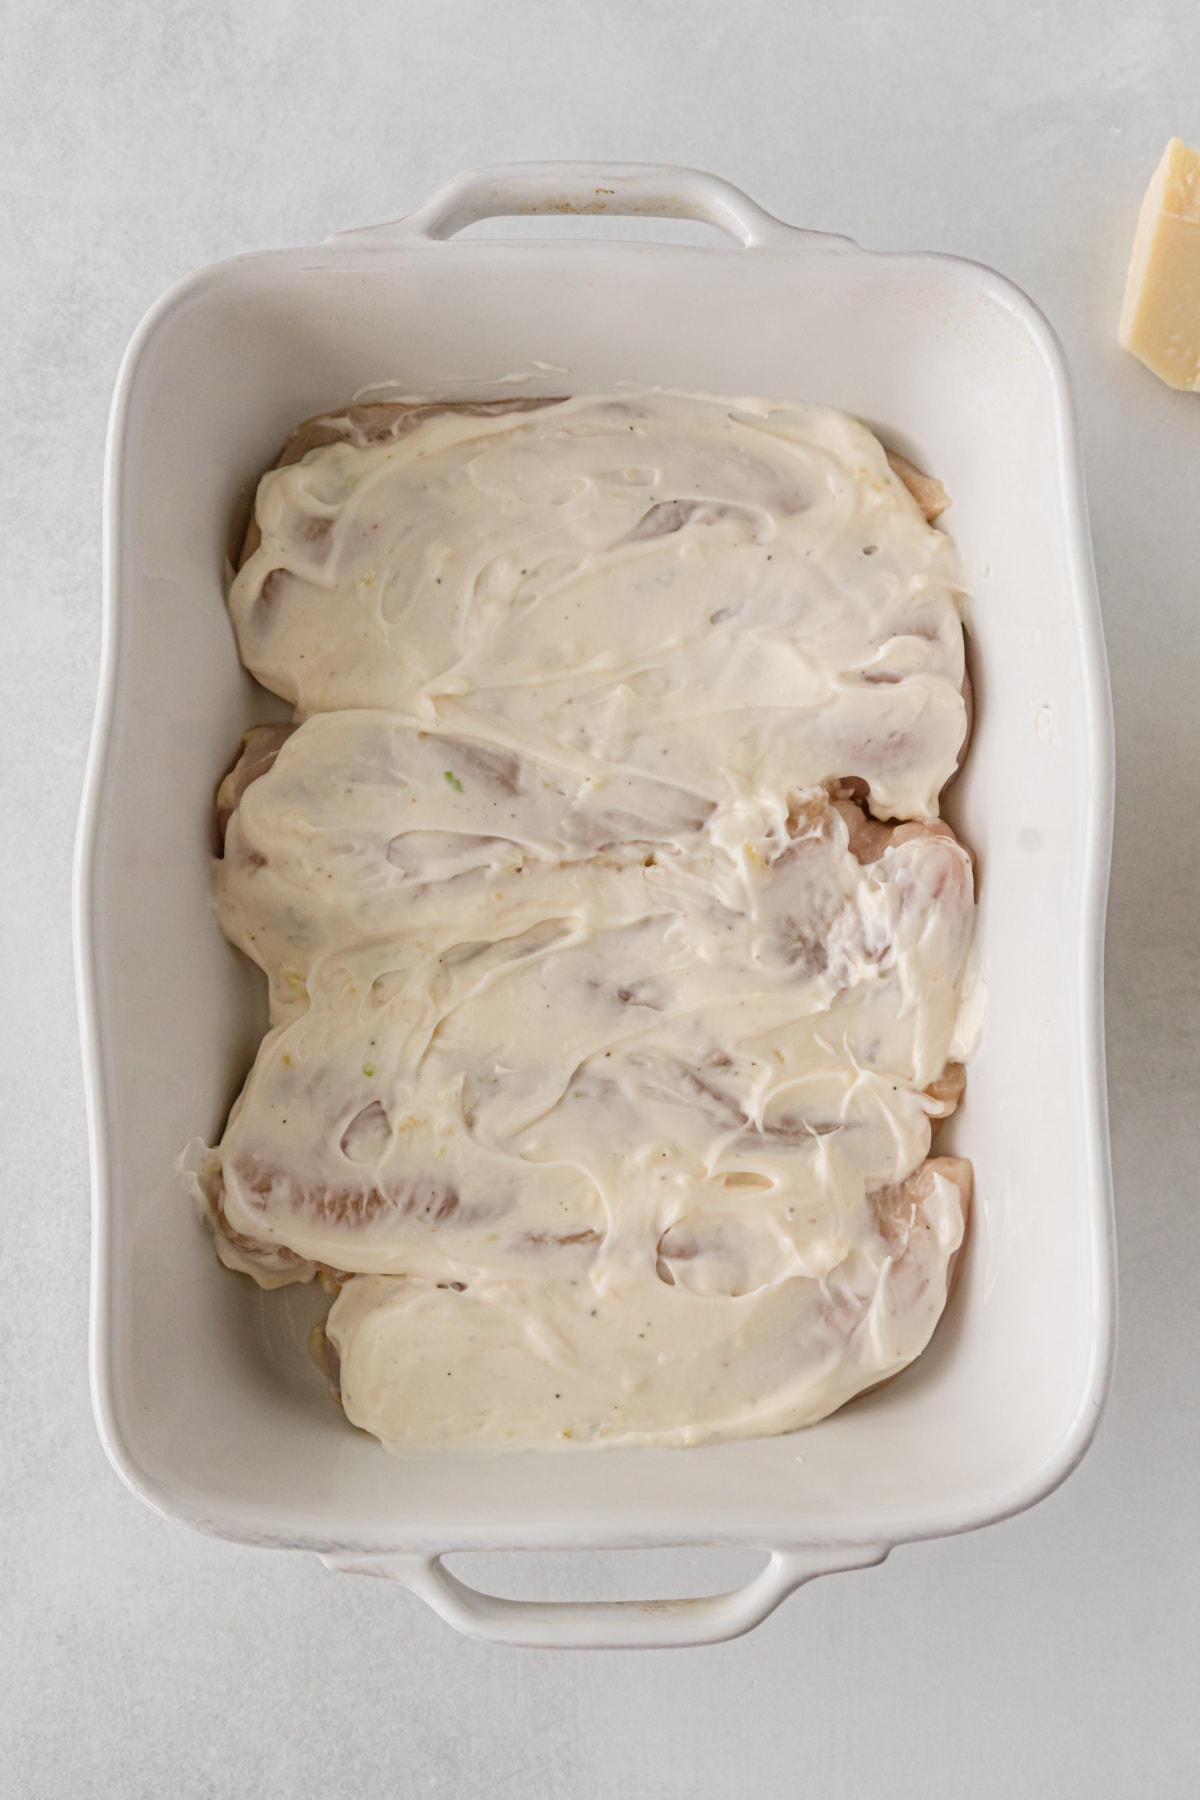 Mayo spread over chicken breasts